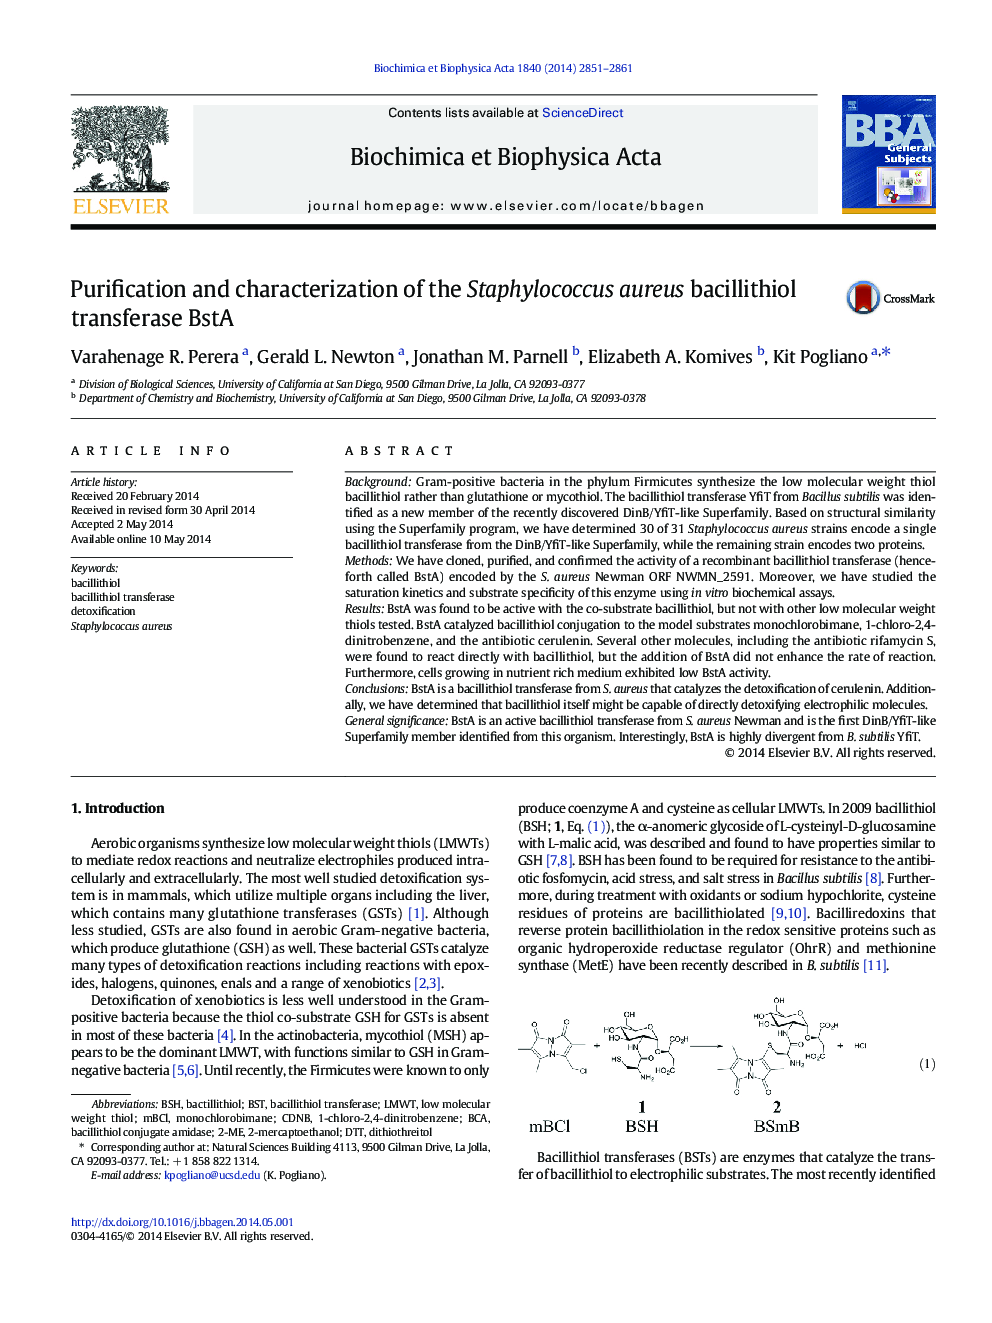 Purification and characterization of the Staphylococcus aureus bacillithiol transferase BstA